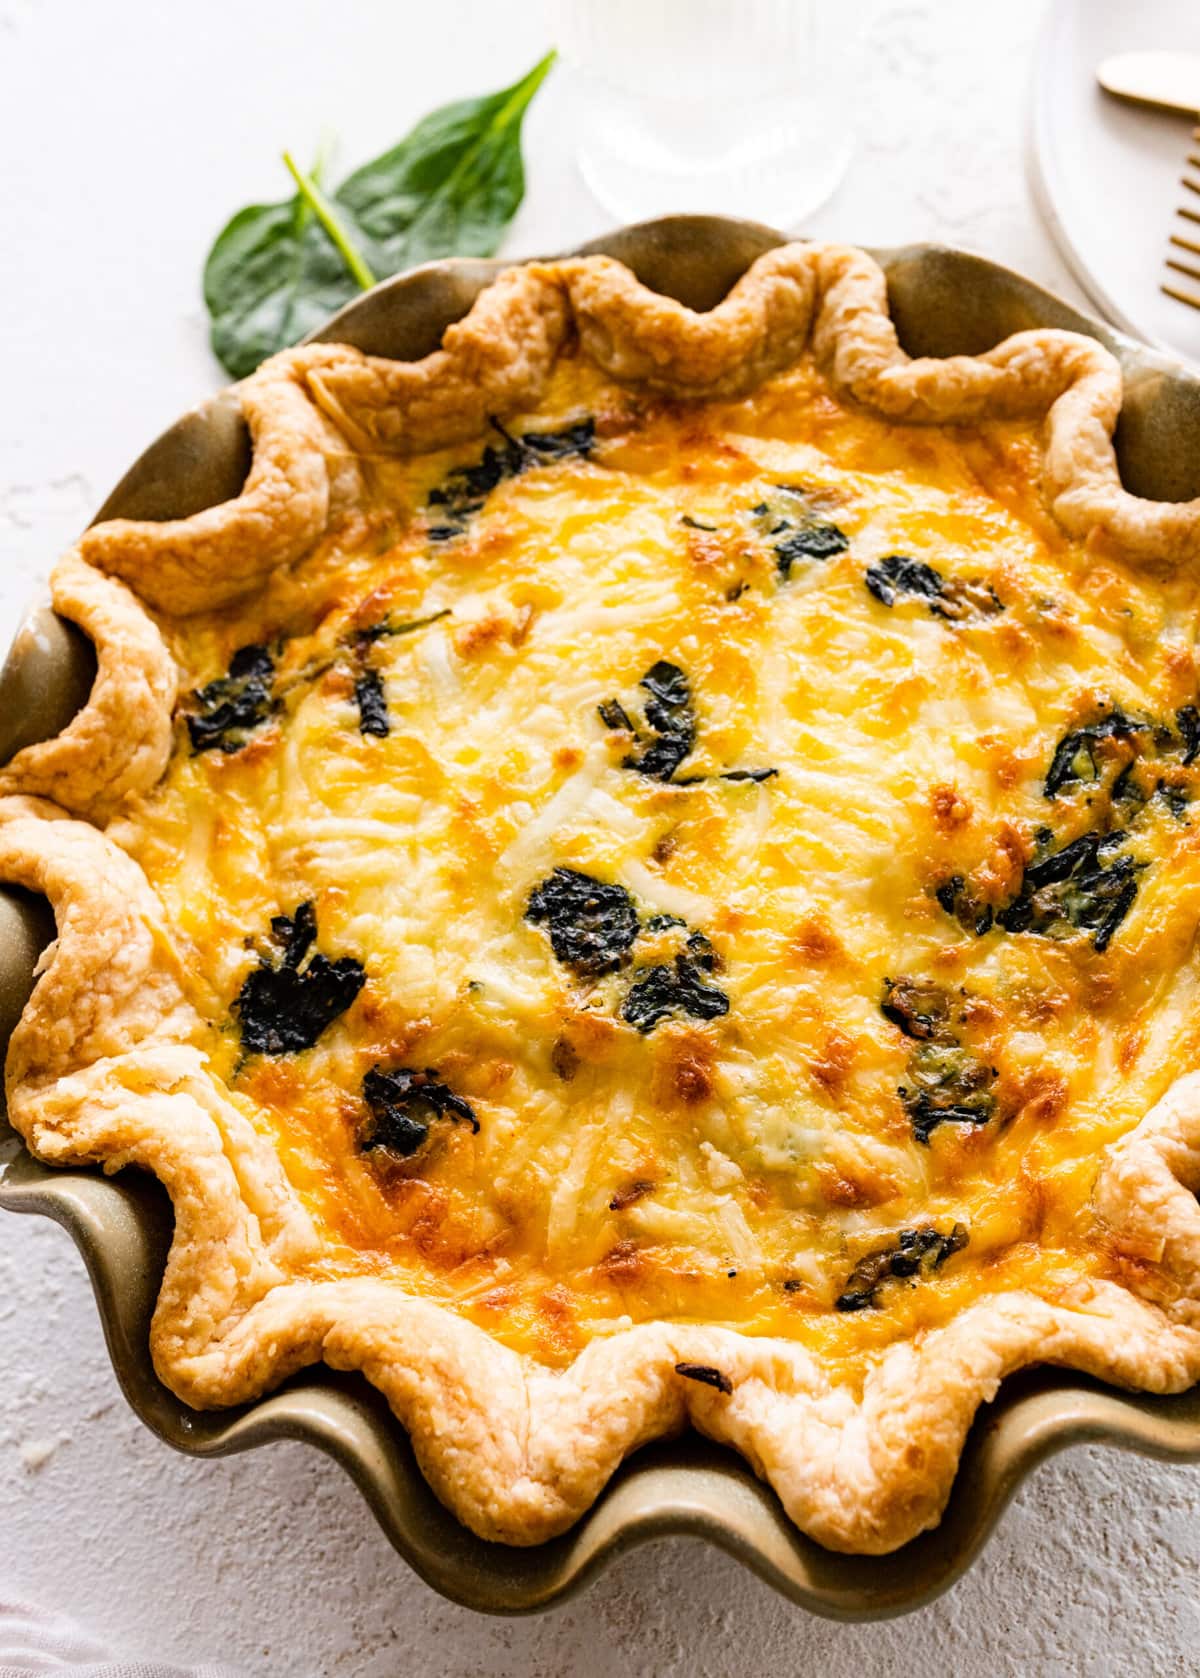 baked spinach quiche recipe out of the oven with golden brown top.